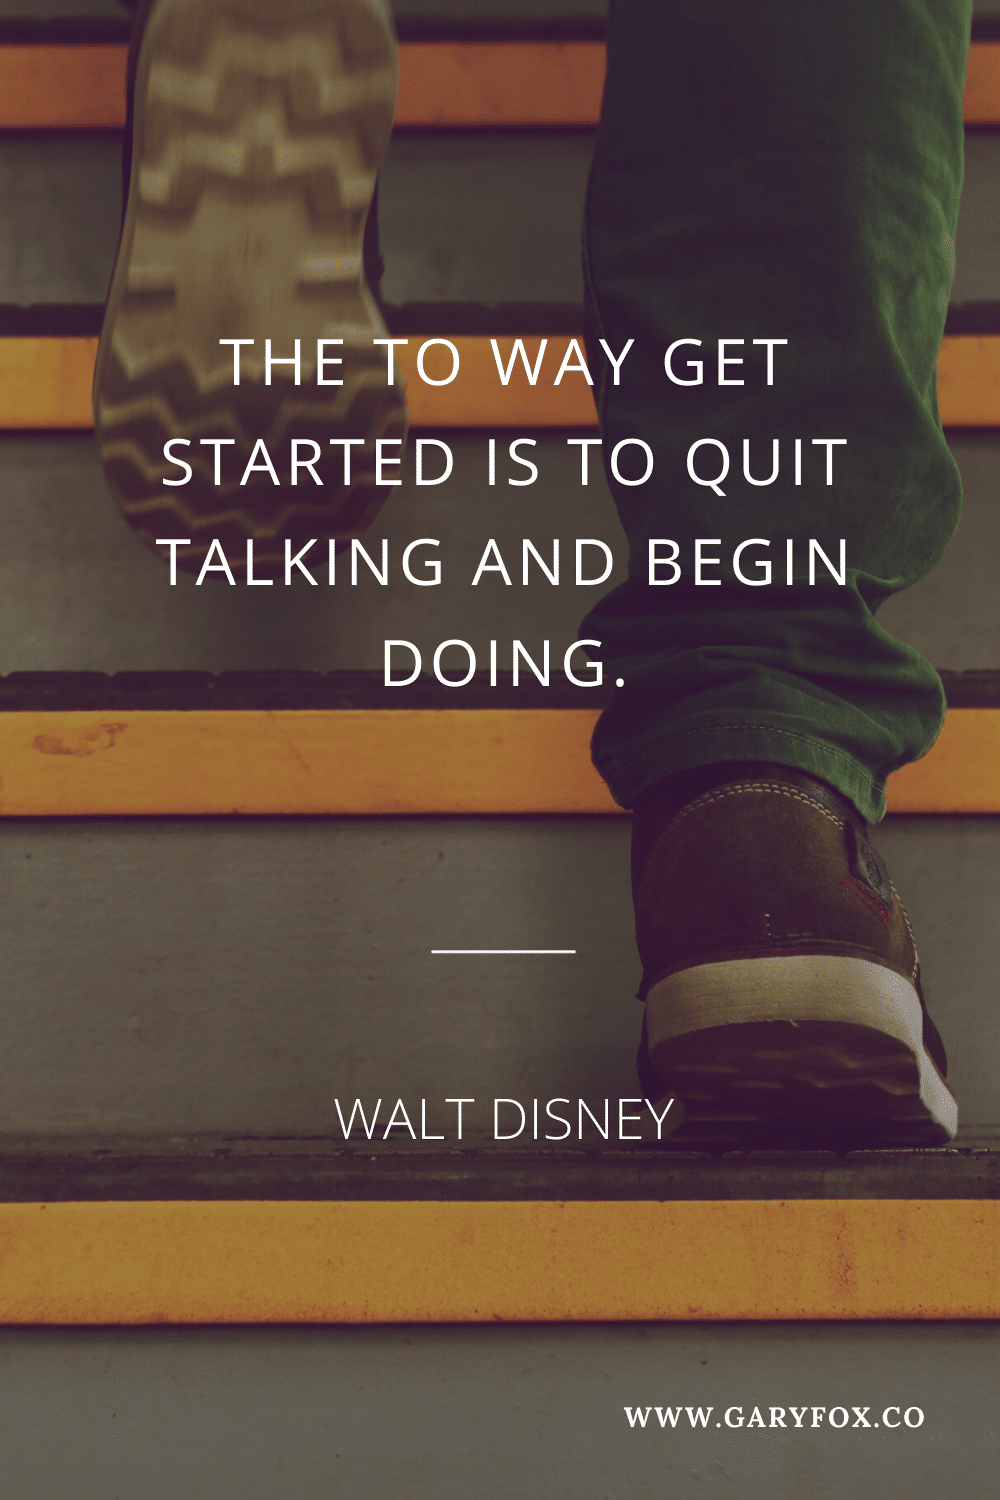 The Way Get Started Is To Quit Talking And Begin Doing.  - Walt Disney